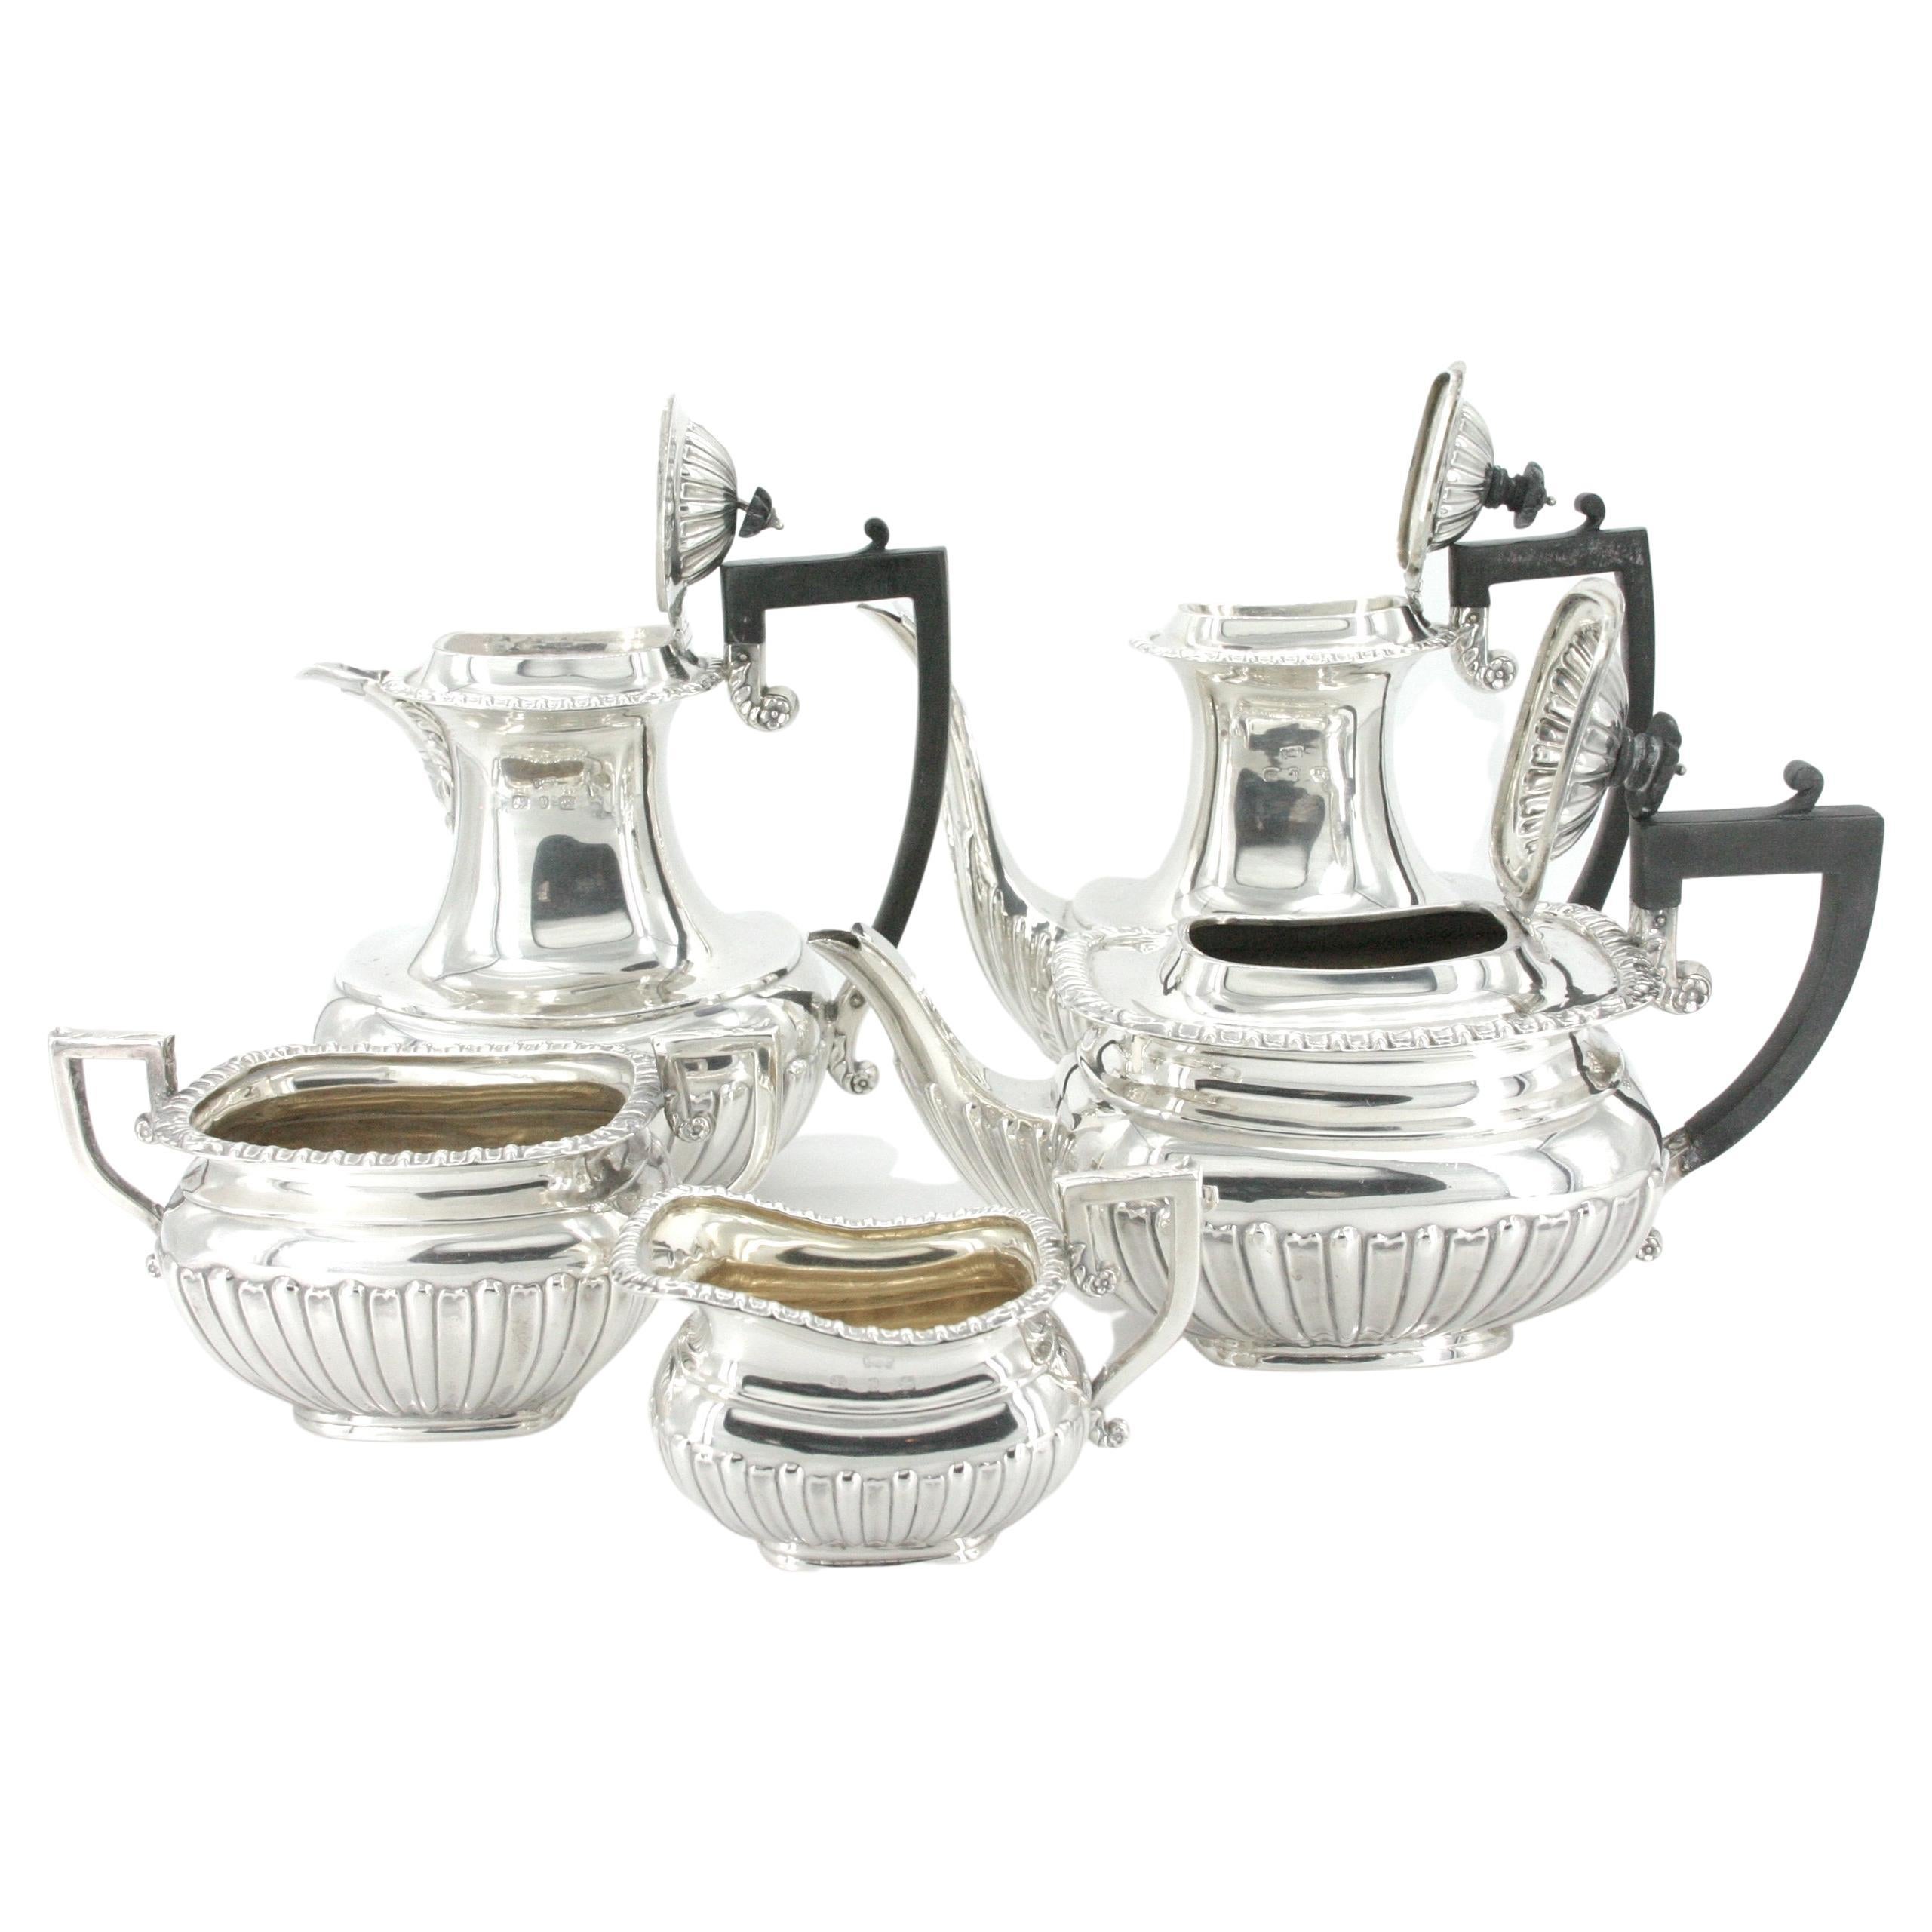 English sterling sliver five piece coffee / tea service with black wood handle. Each piece is in great condition , minor wear consistent with age / use. Maker's mark undersigned, each piece is mark placing the set from 1901 year Sheffield England .